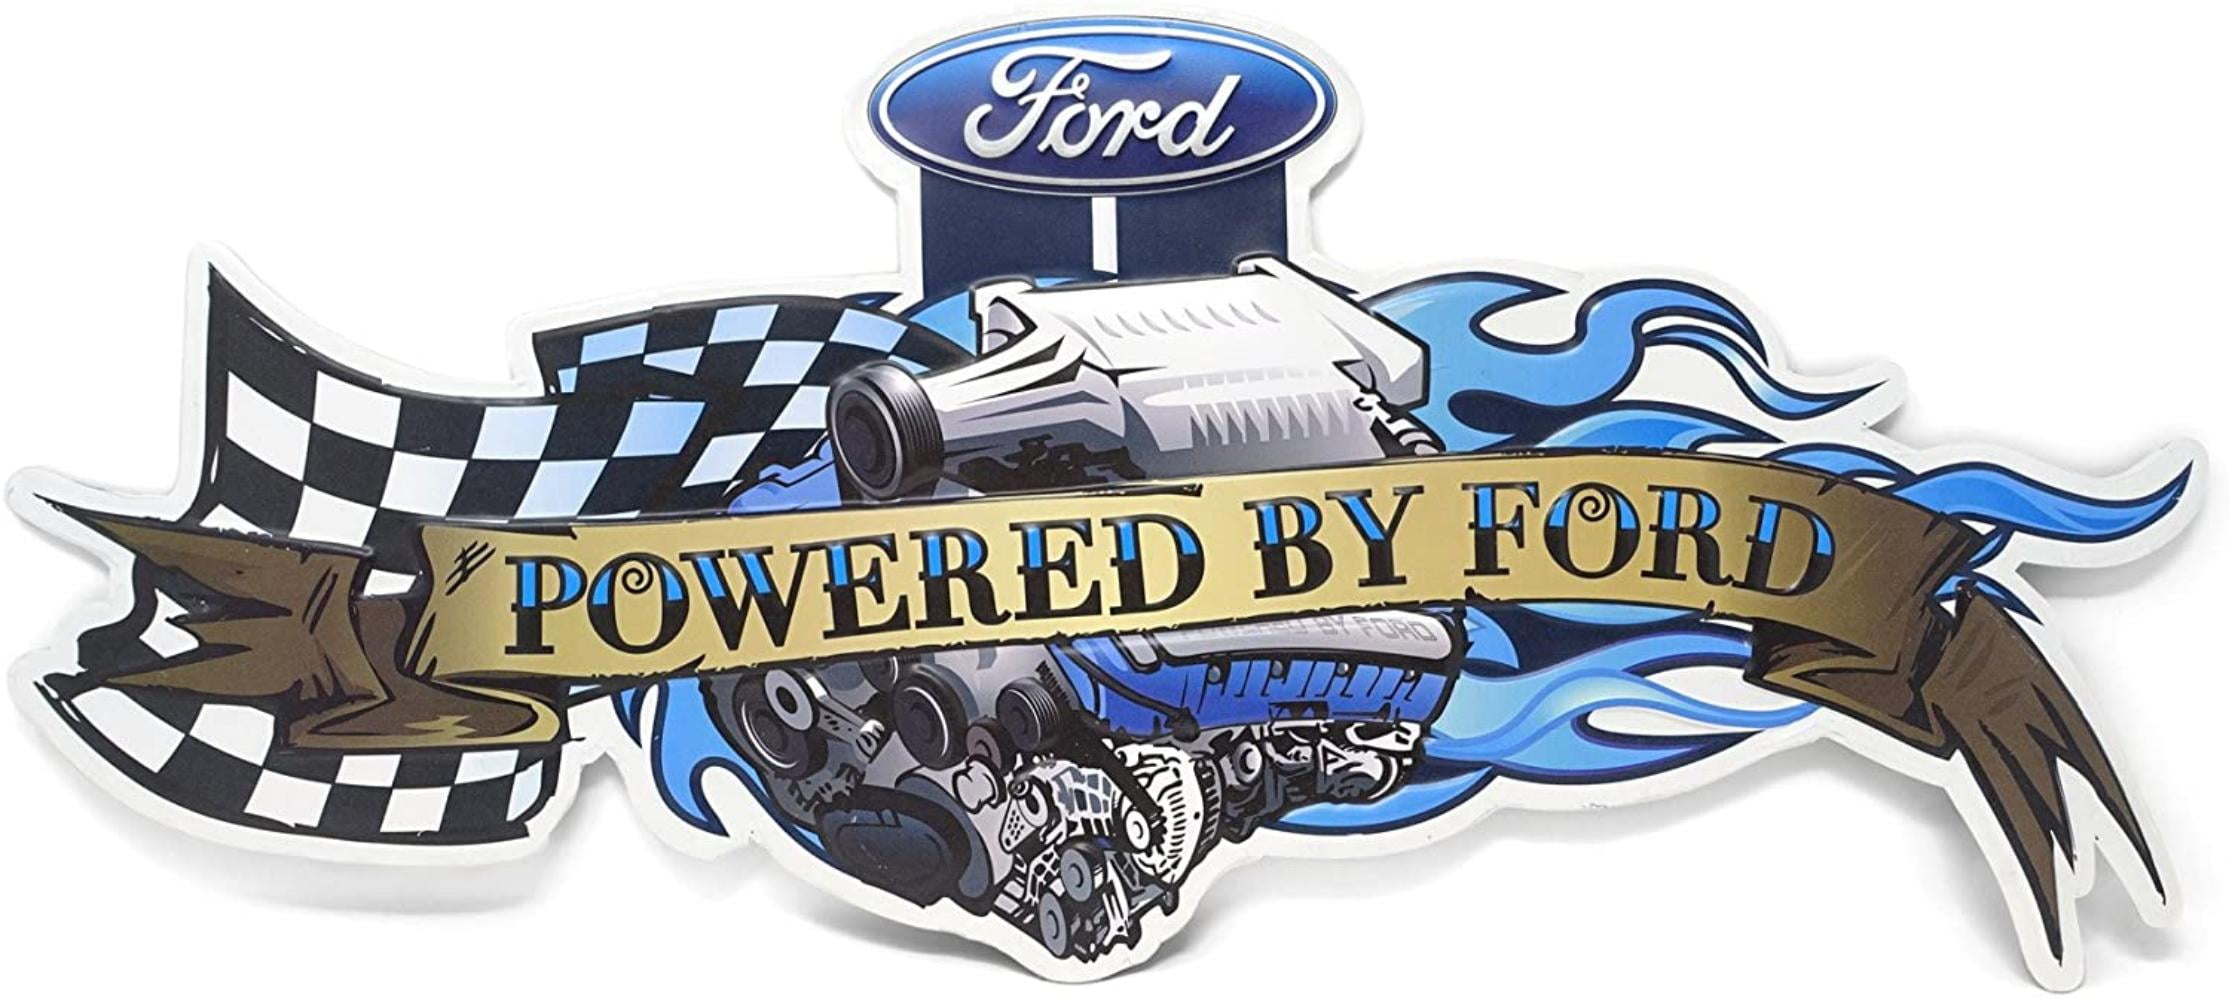 Ford "Powered By Ford" Shaped and Embossed Metal Wall Decor Sign 24" x 10.5" 